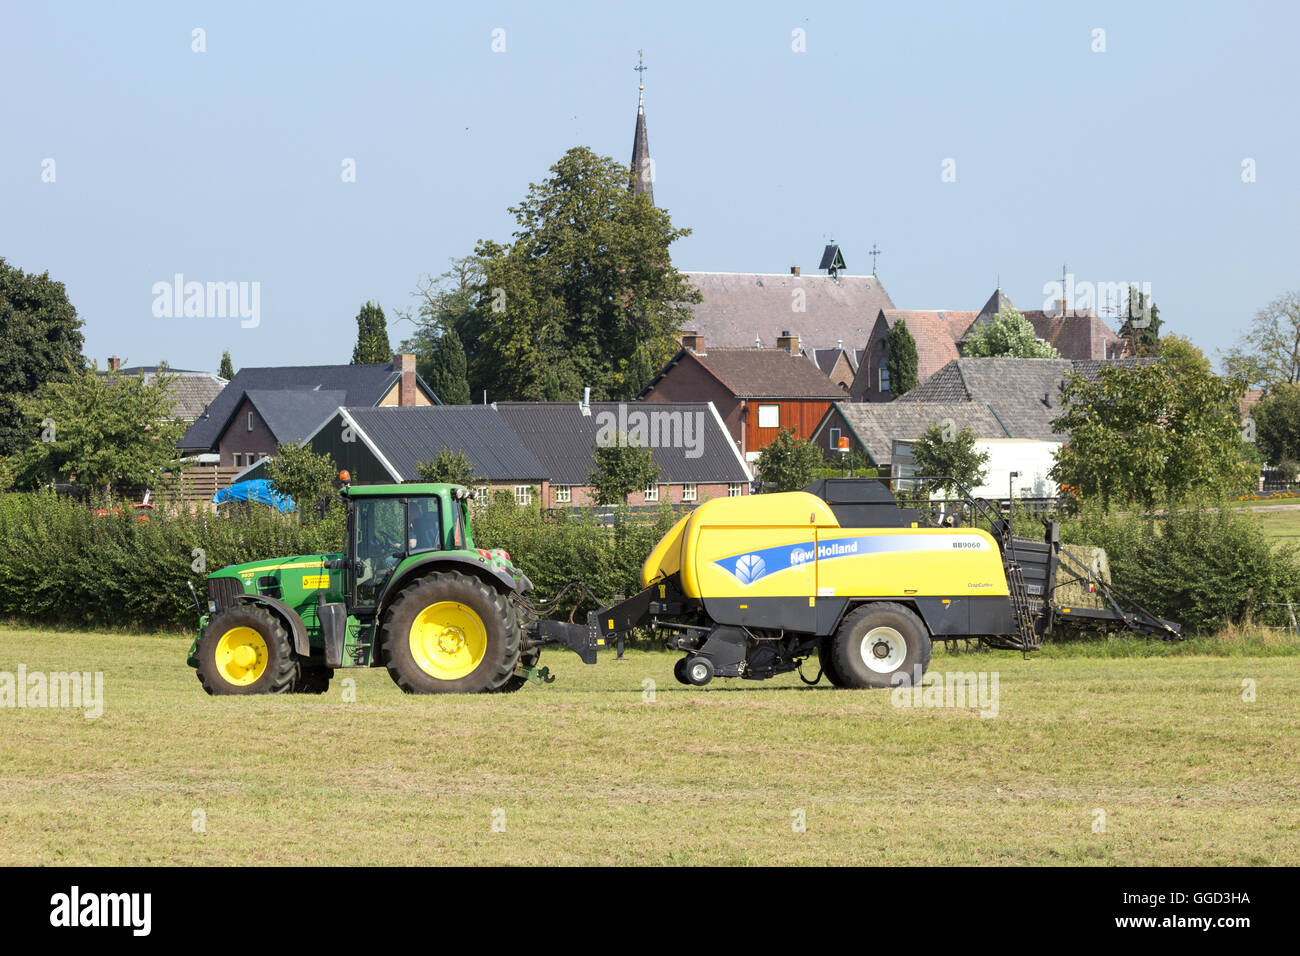 John Deere tractor with a New Holland baler Stock Photo